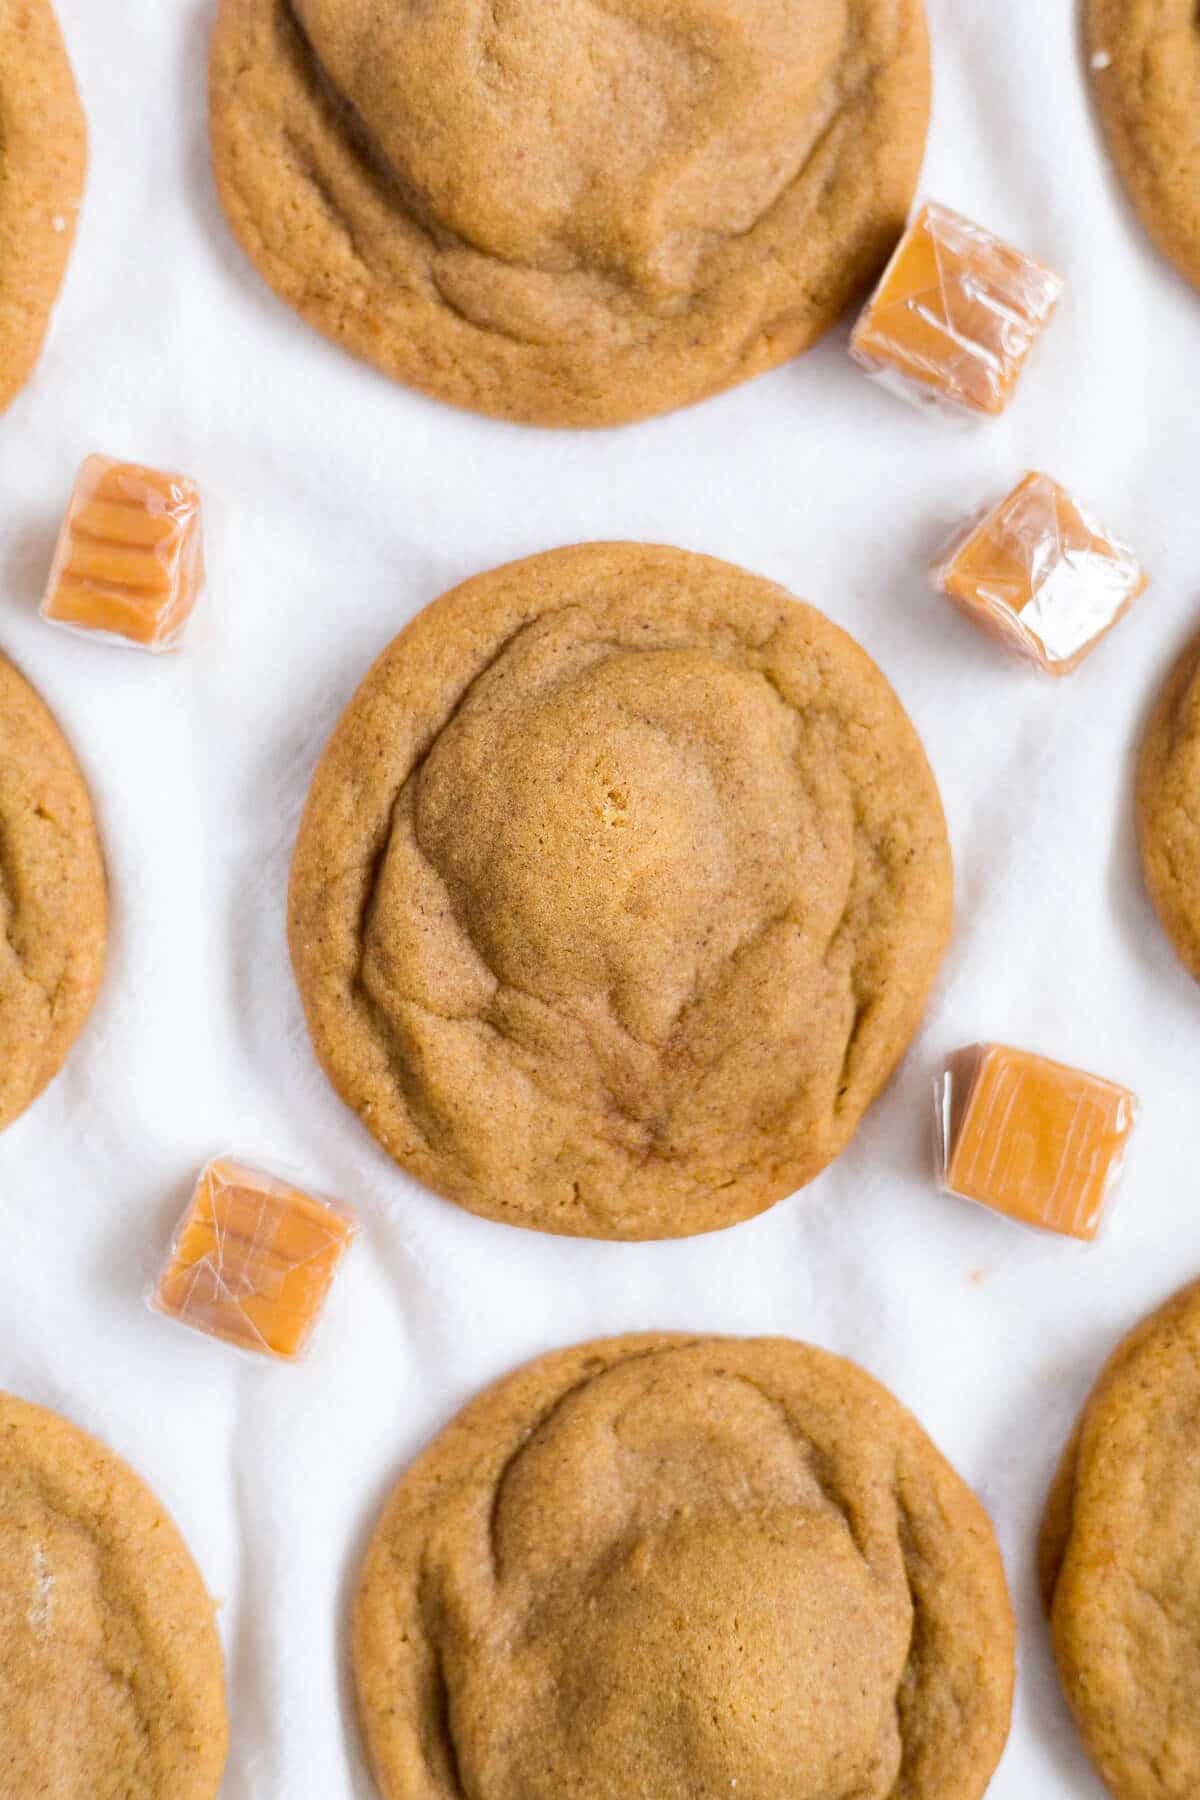 These soft and chewy ginger cookies are stuffed with a little salted caramel and baked to perfection. They're a great holiday recipe to add to your Christmas cookie collection.